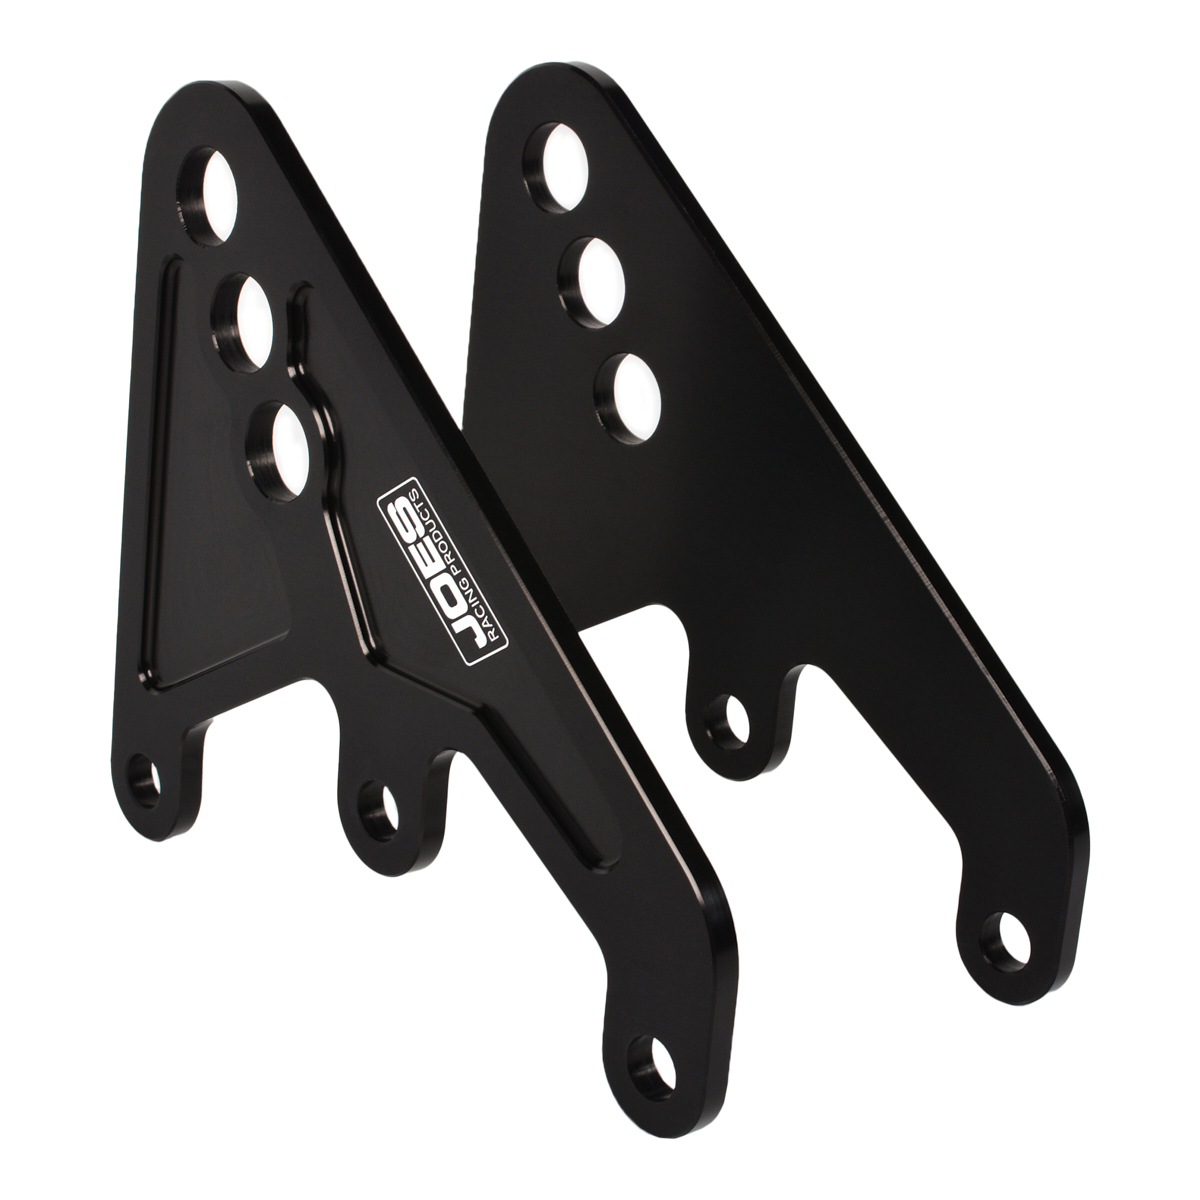 Joes Racing Products 12150-B Third Link Bracket, 3 Hole, Aluminum, Black Anodized, Pair